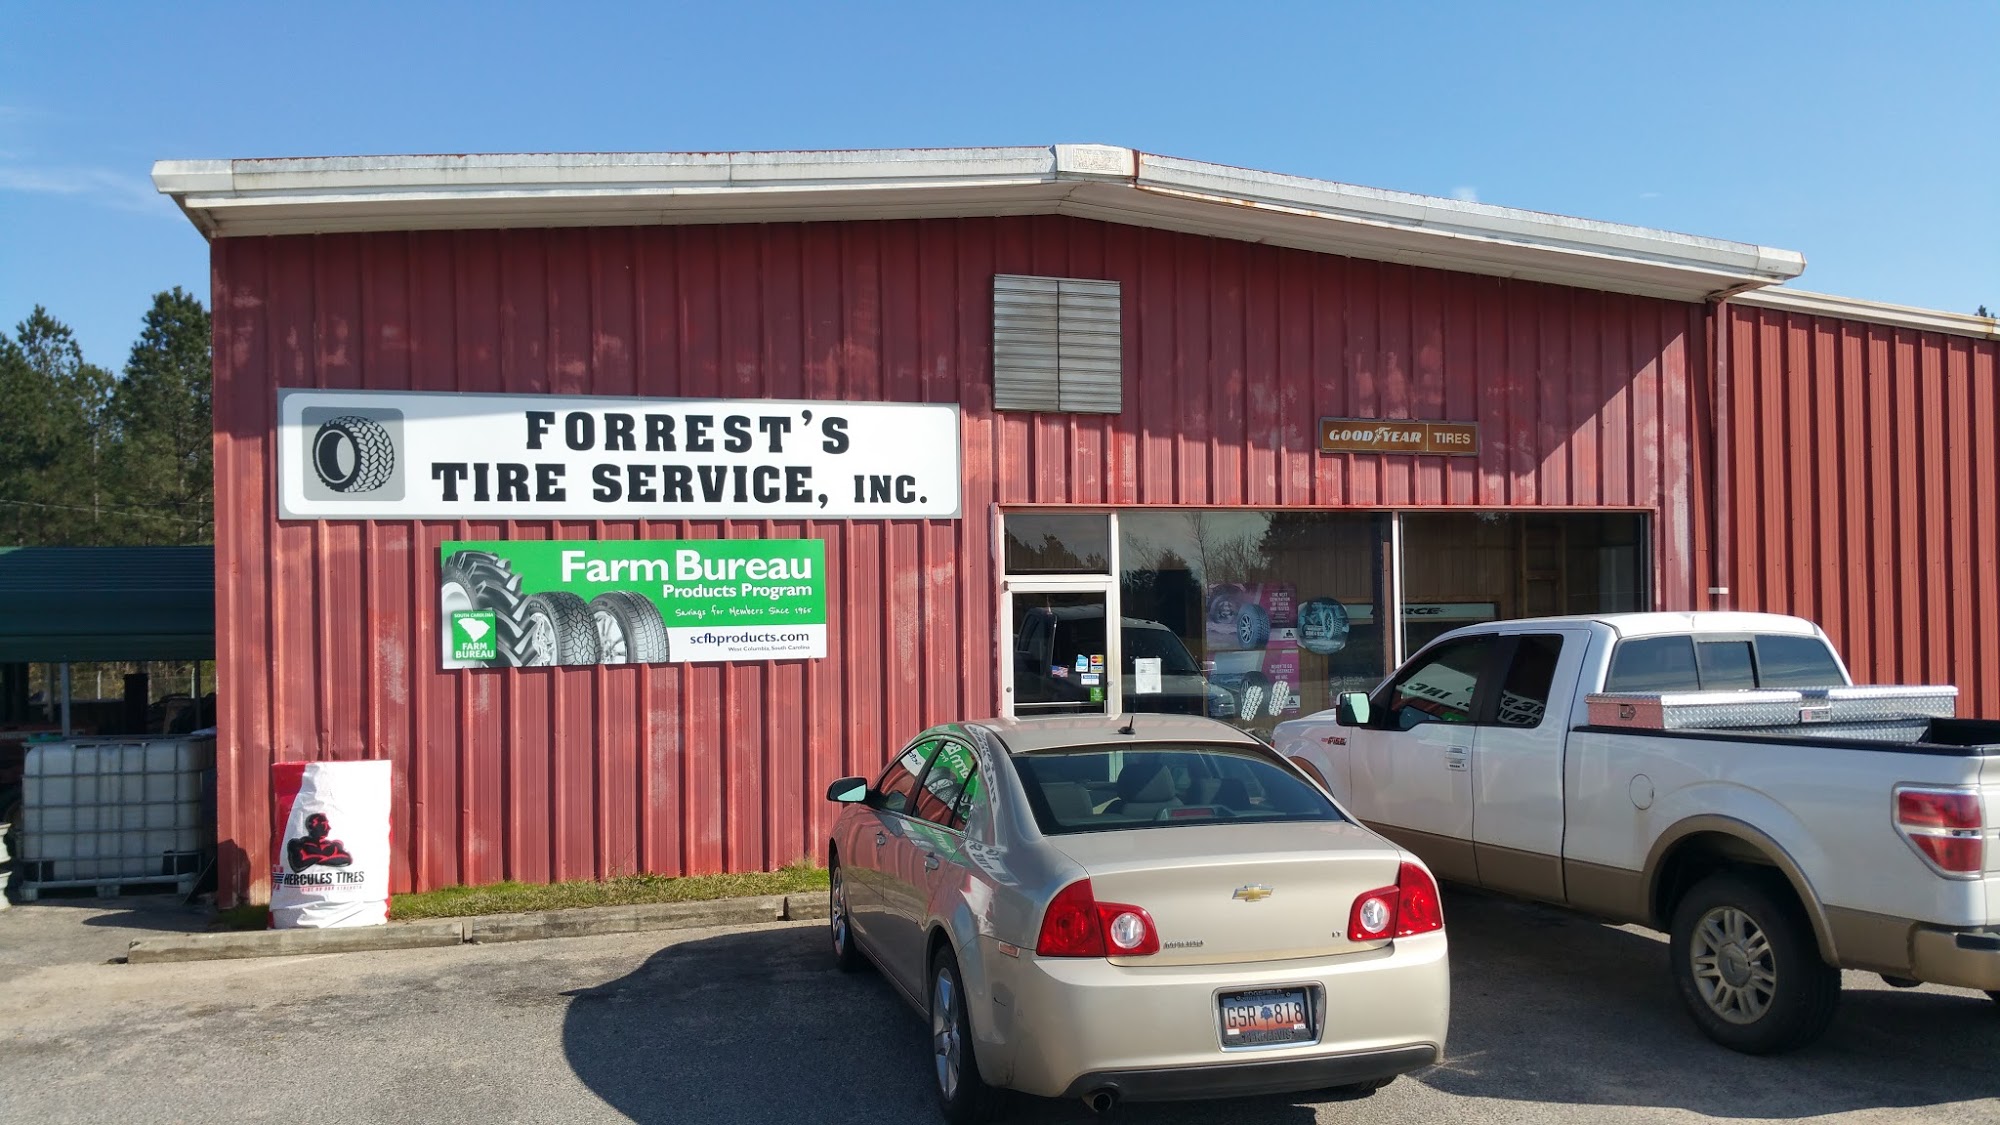 Forrest's Tire Service